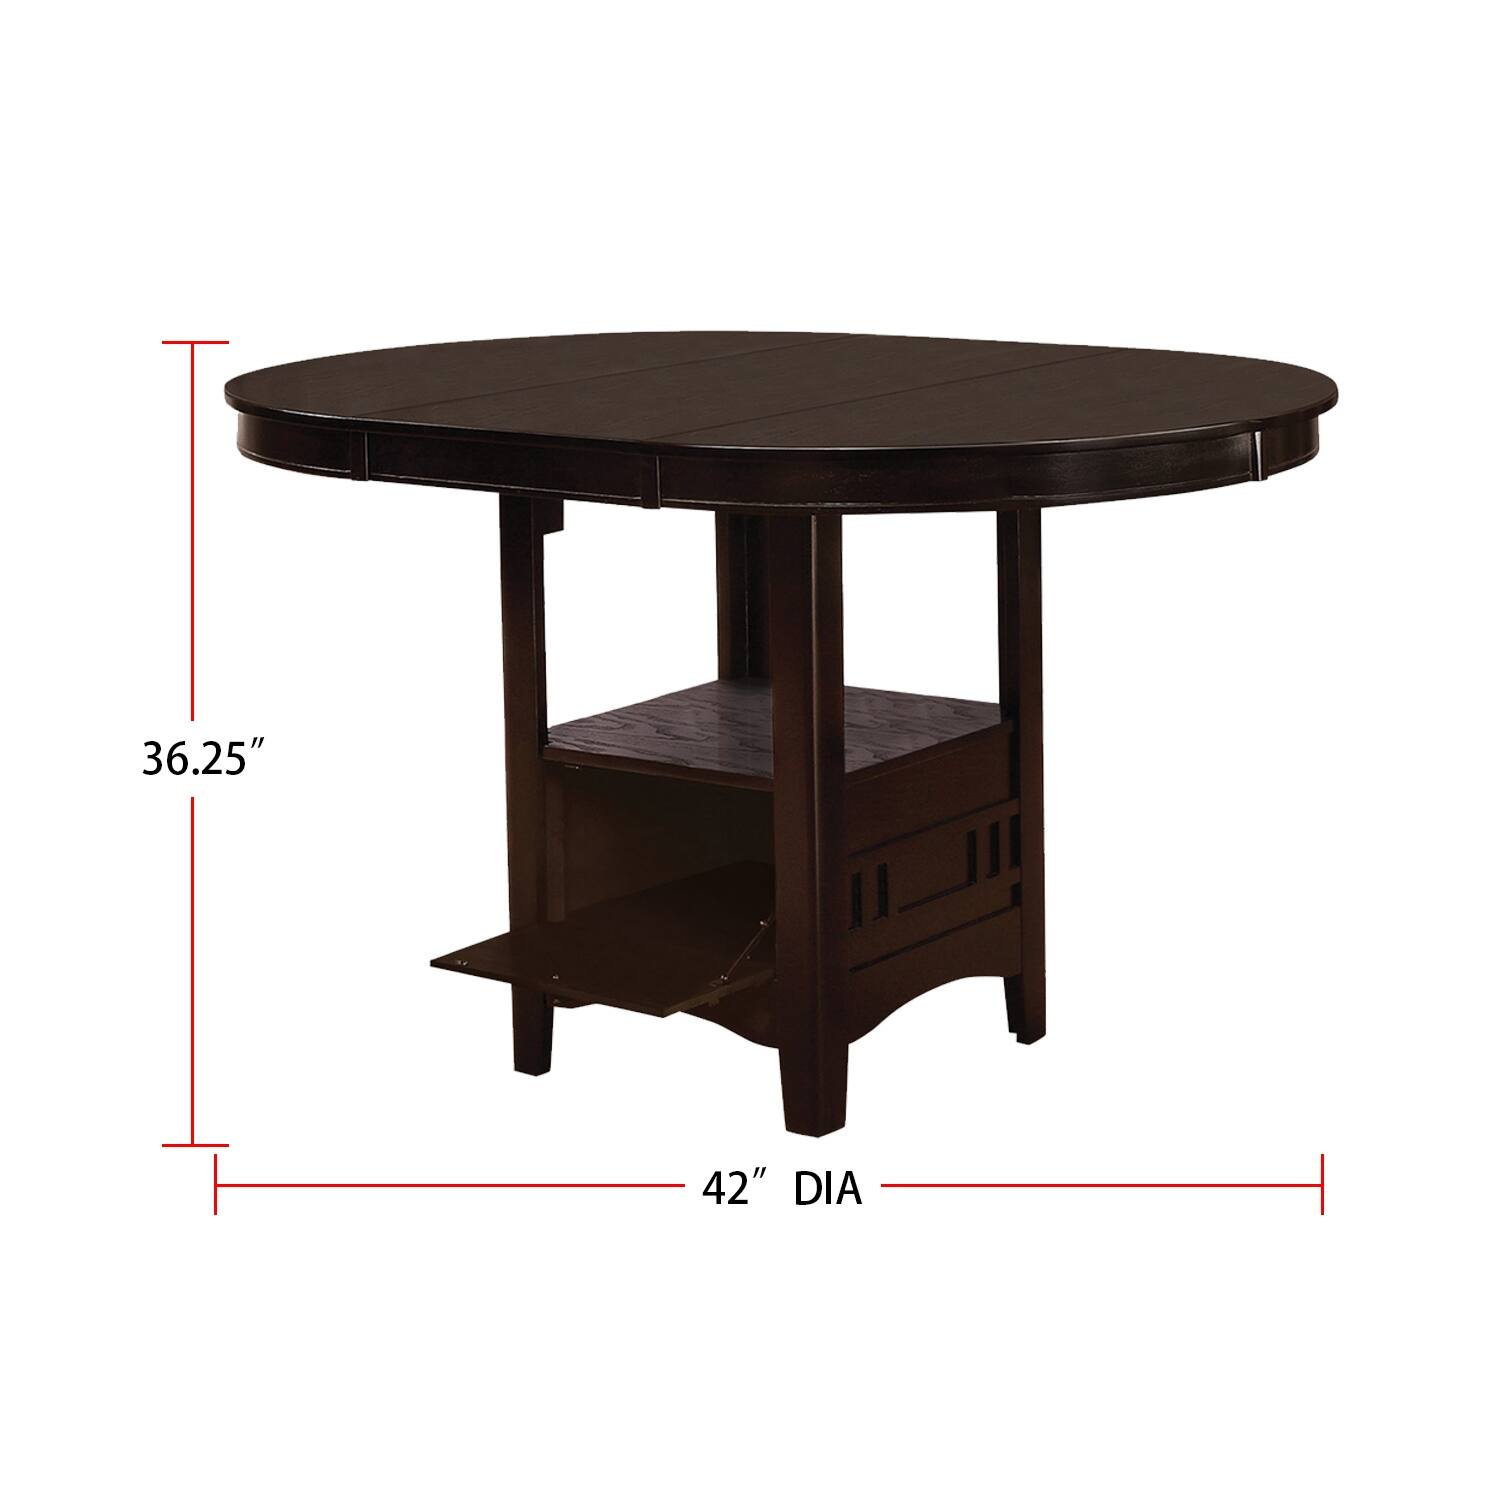 Wood Counter Height Table in Espresso